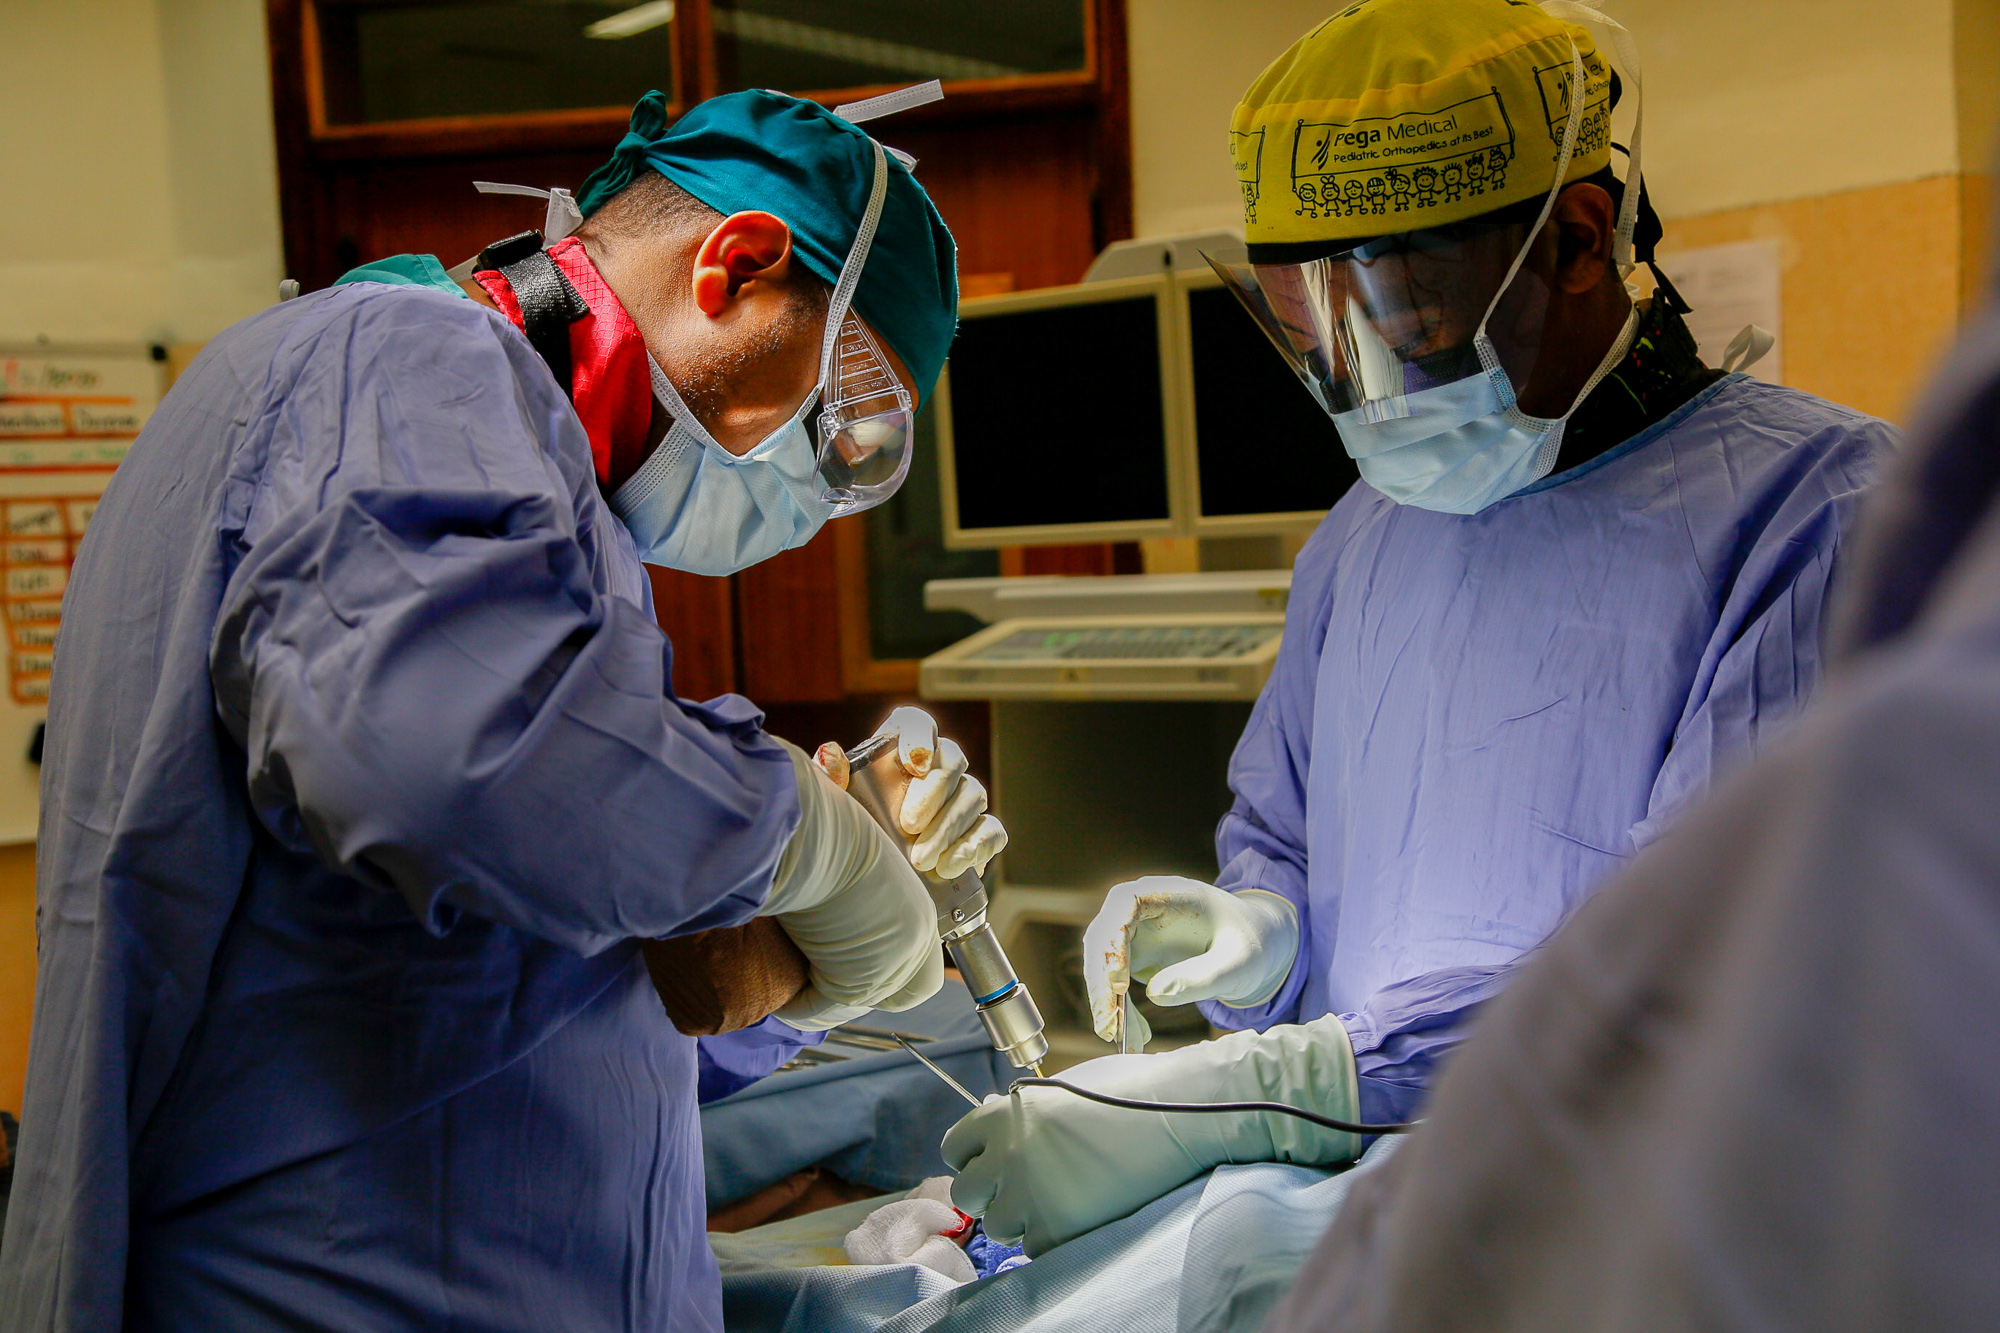 Investing in Surgical Training to Reach More Children in Need